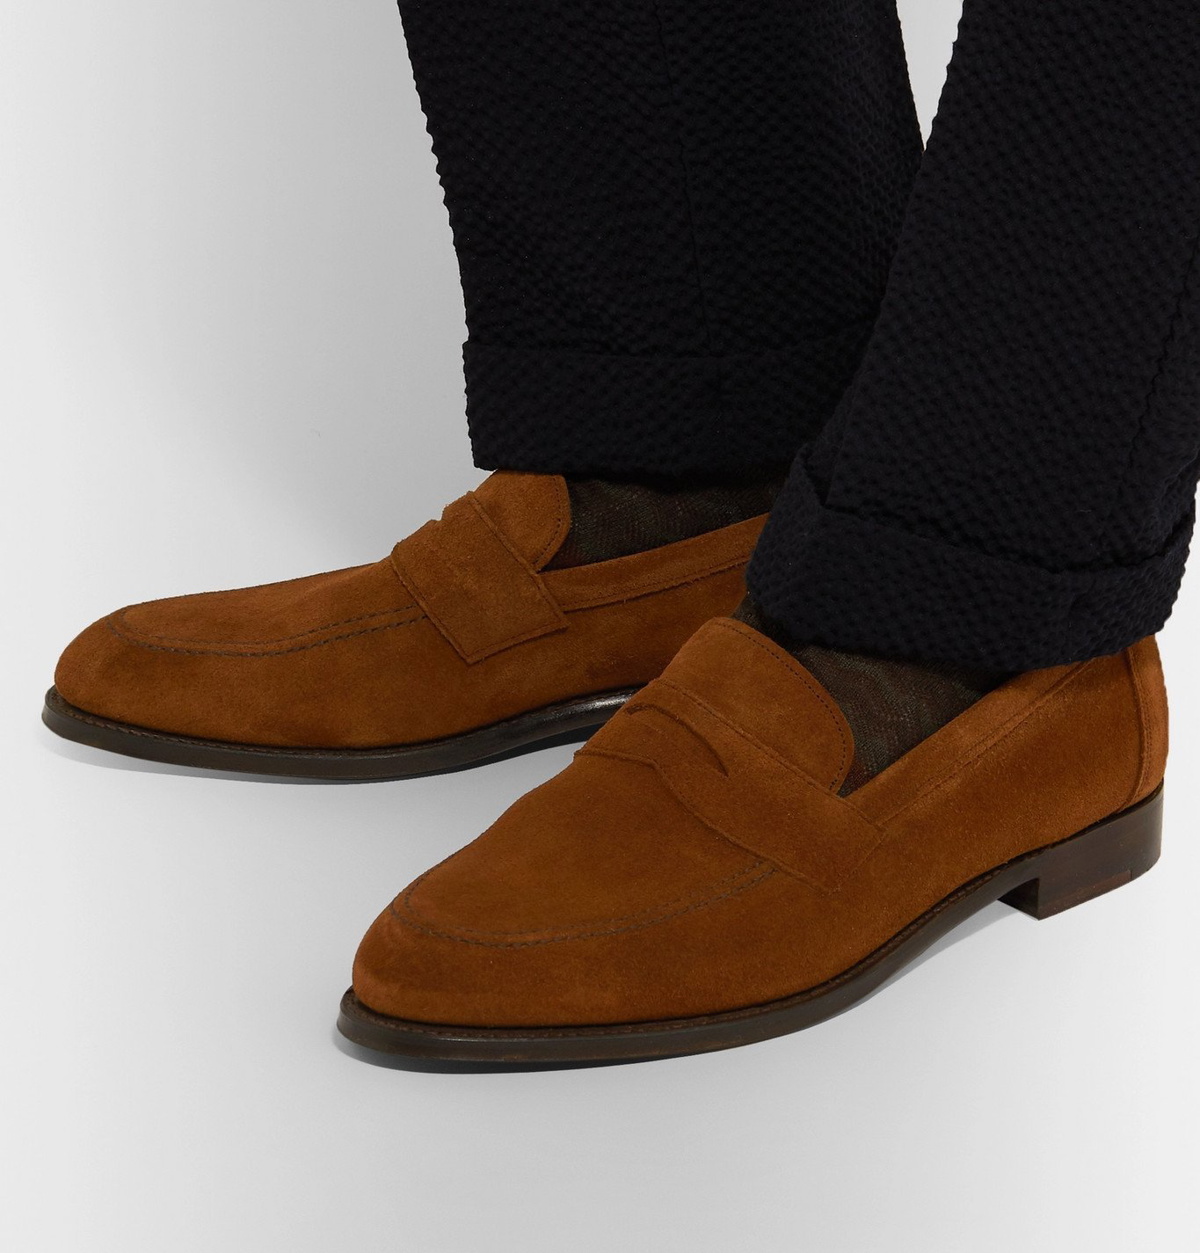 Cheaney - Hadley Suede Penny Loafers - Brown Cheaney